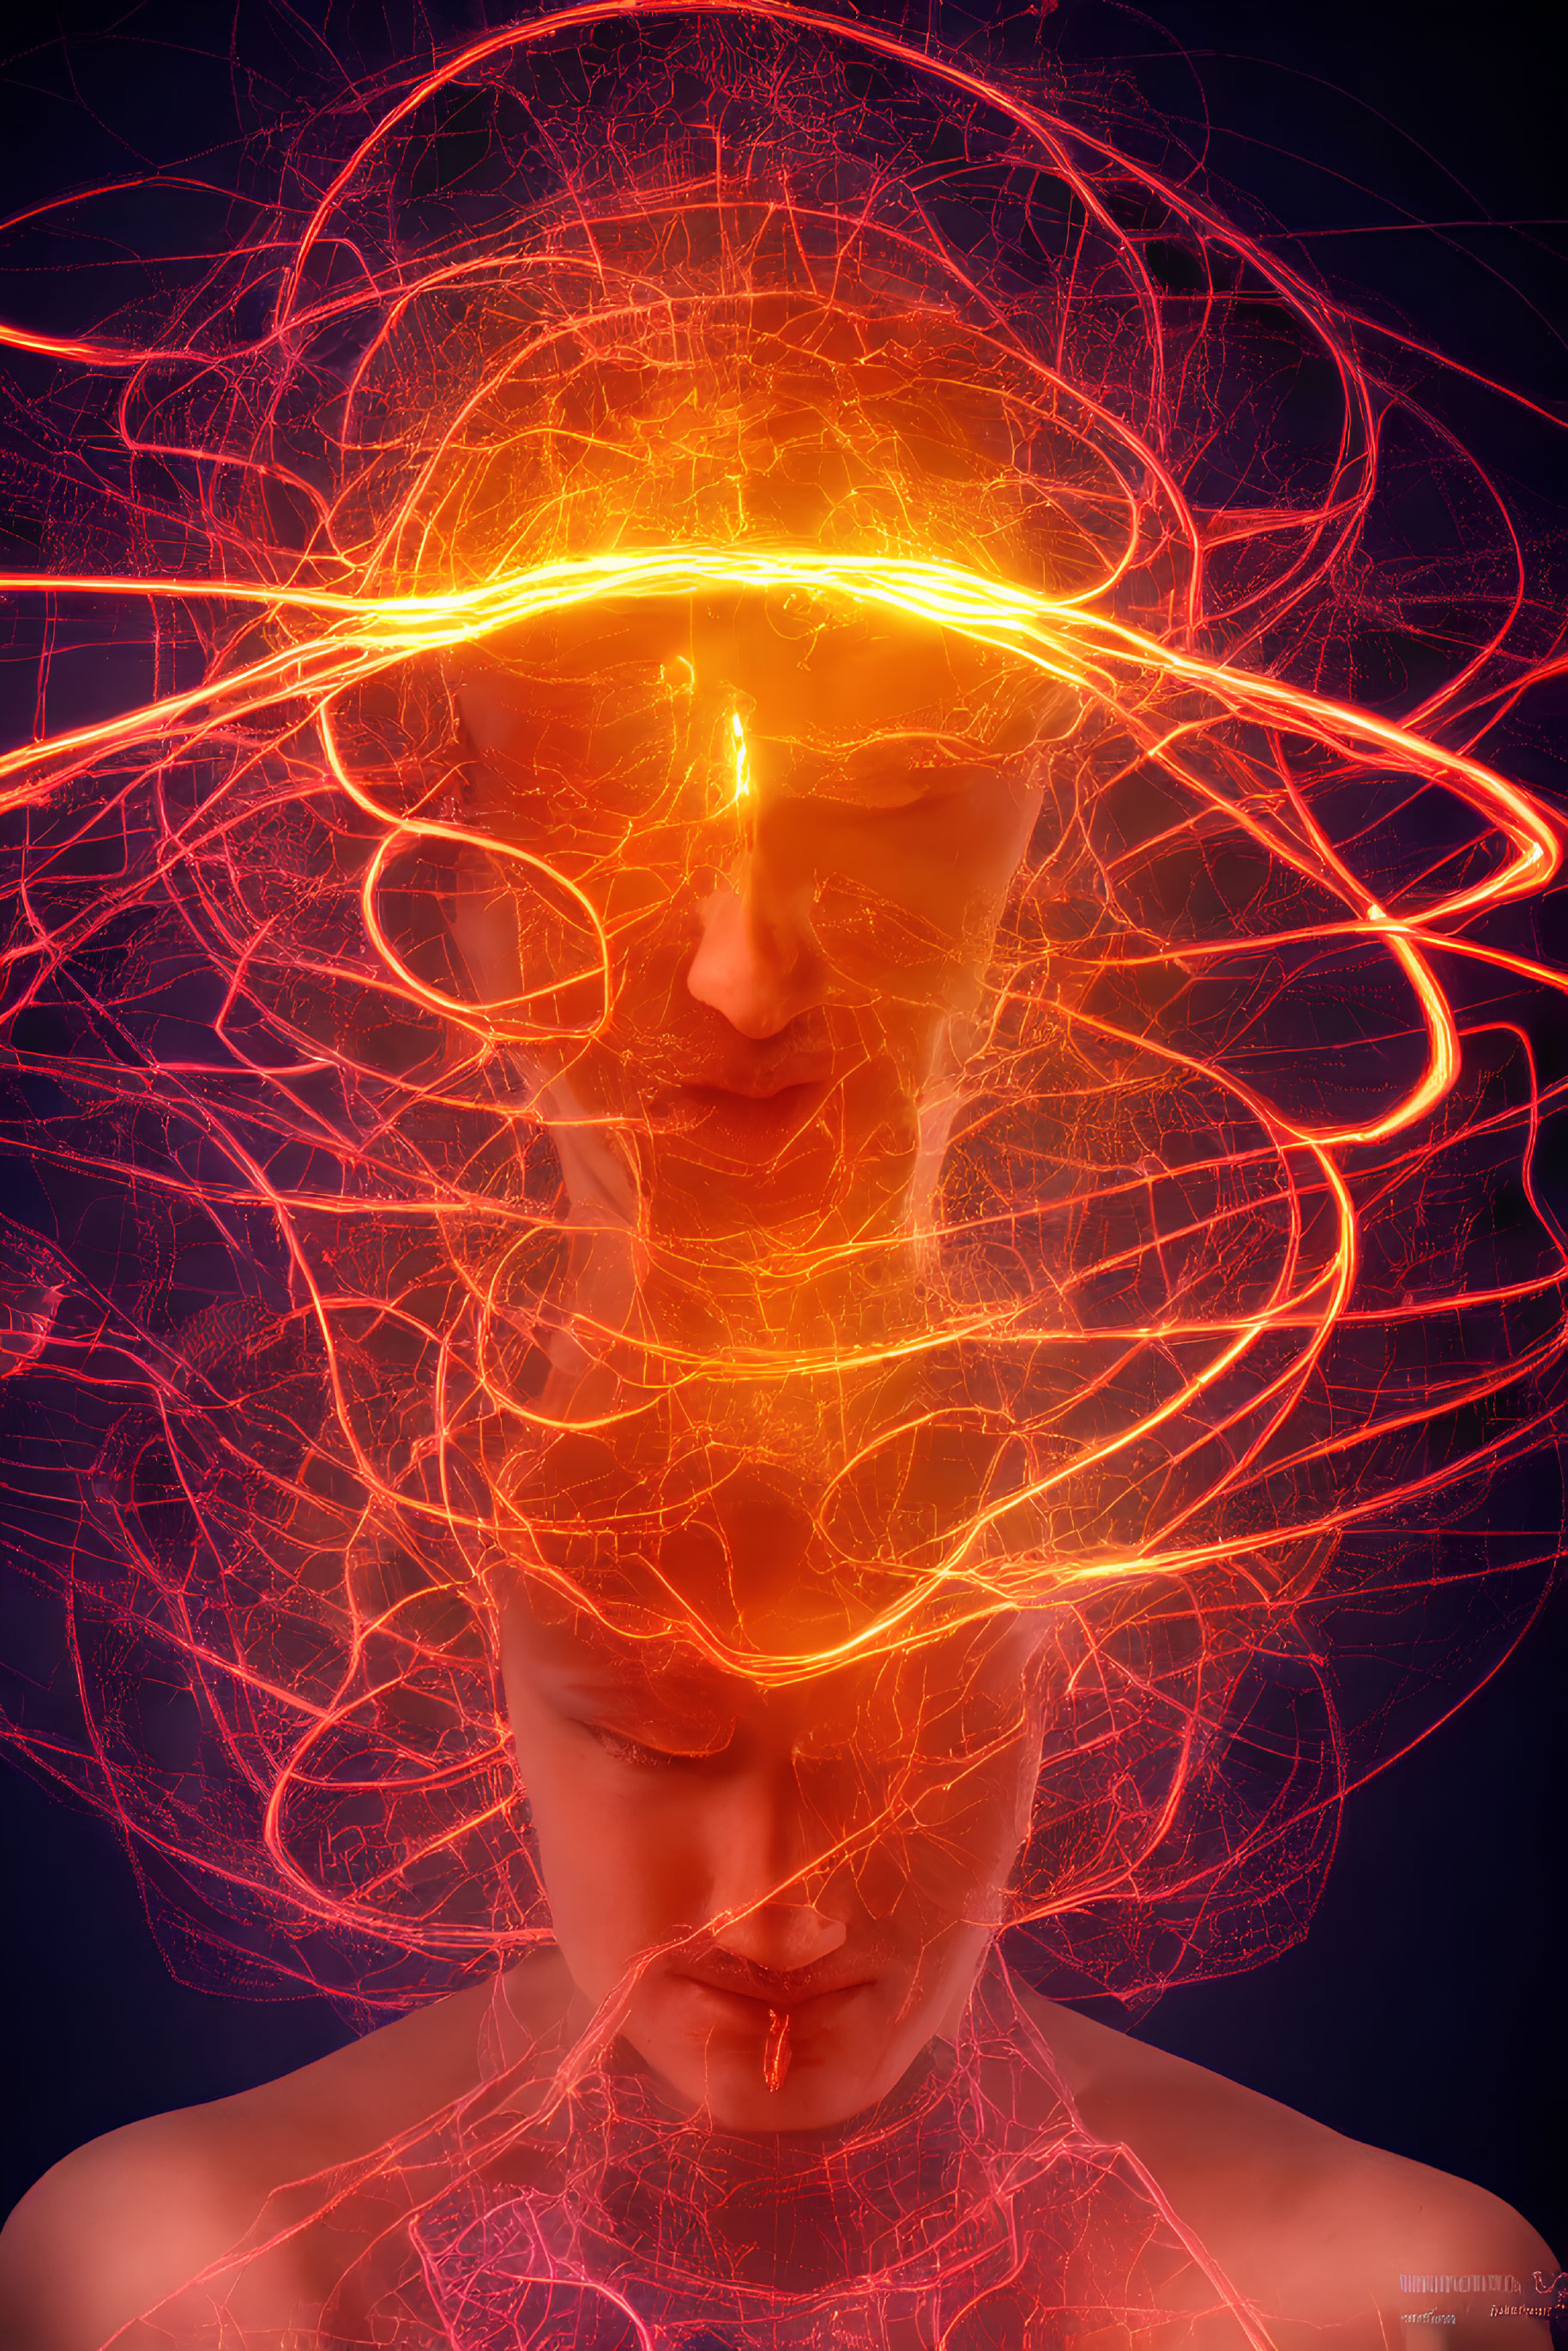 Digital abstract art: Human figure with glowing energy lines around head